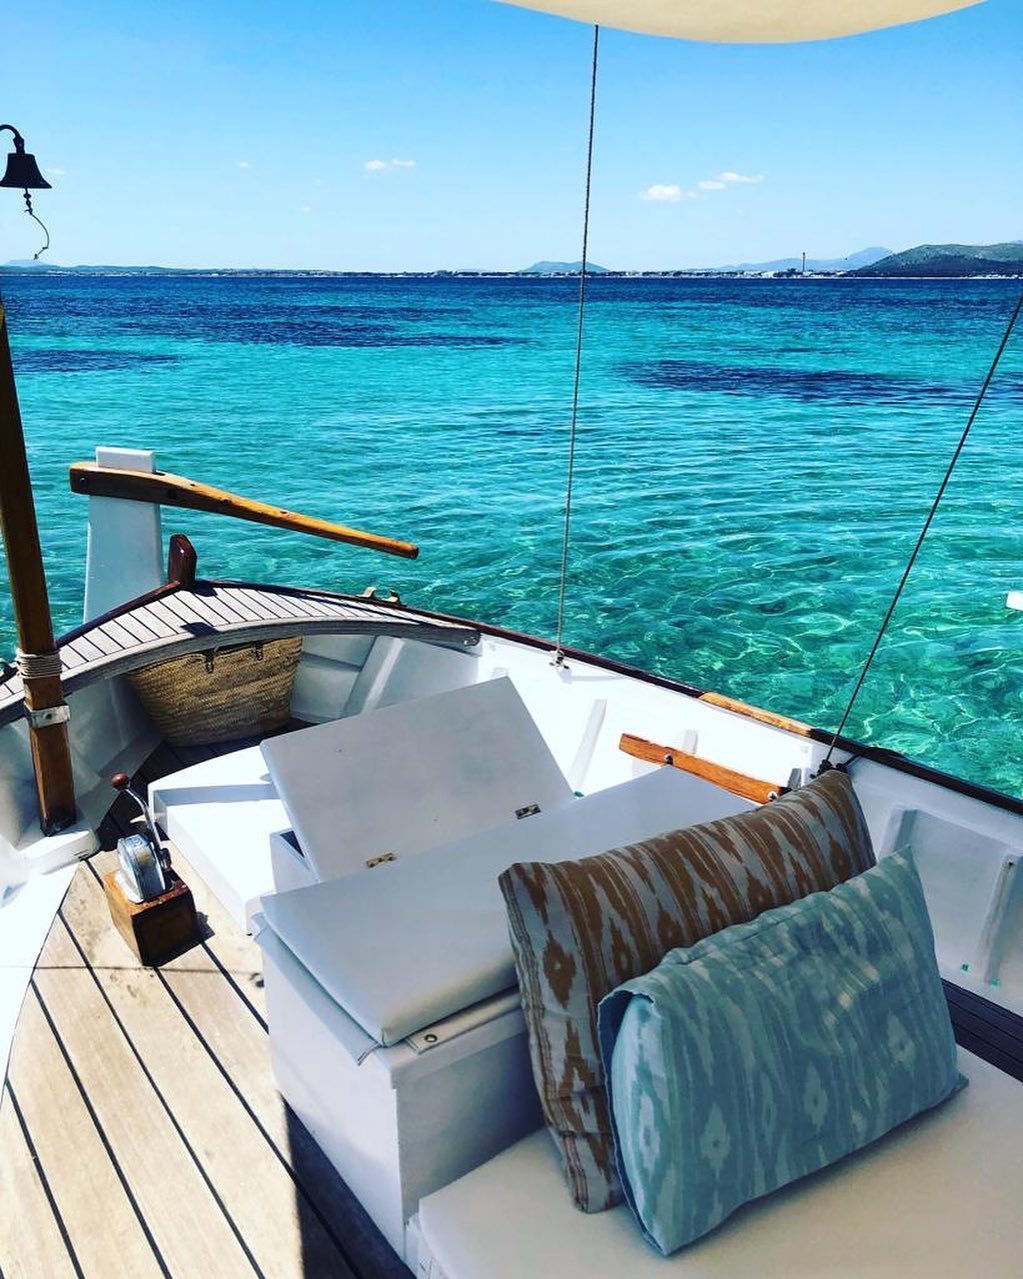 #FoxPRTips | “When in Mallorca, charter a traditional Mallorcan boat @llautsanfrancisco to enjoy the crystal clear waters and a traditional local lunch” recommends @katealexander_ 
#foxprtravel #mallorca #spain #luxurytravel